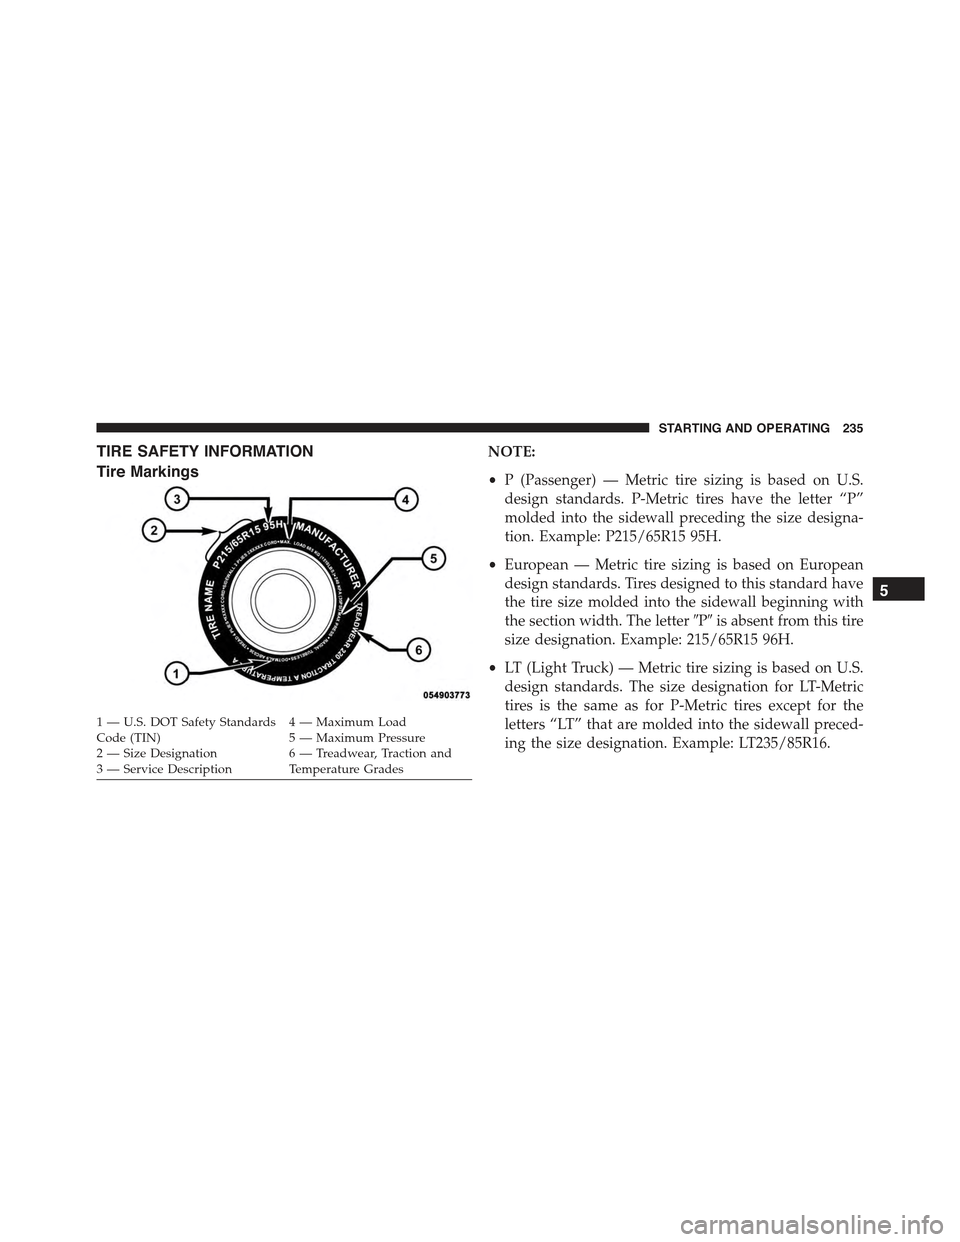 FIAT 500E 2015 2.G User Guide TIRE SAFETY INFORMATION
Tire Markings
NOTE:
•P (Passenger) — Metric tire sizing is based on U.S.
design standards. P-Metric tires have the letter “P”
molded into the sidewall preceding the siz